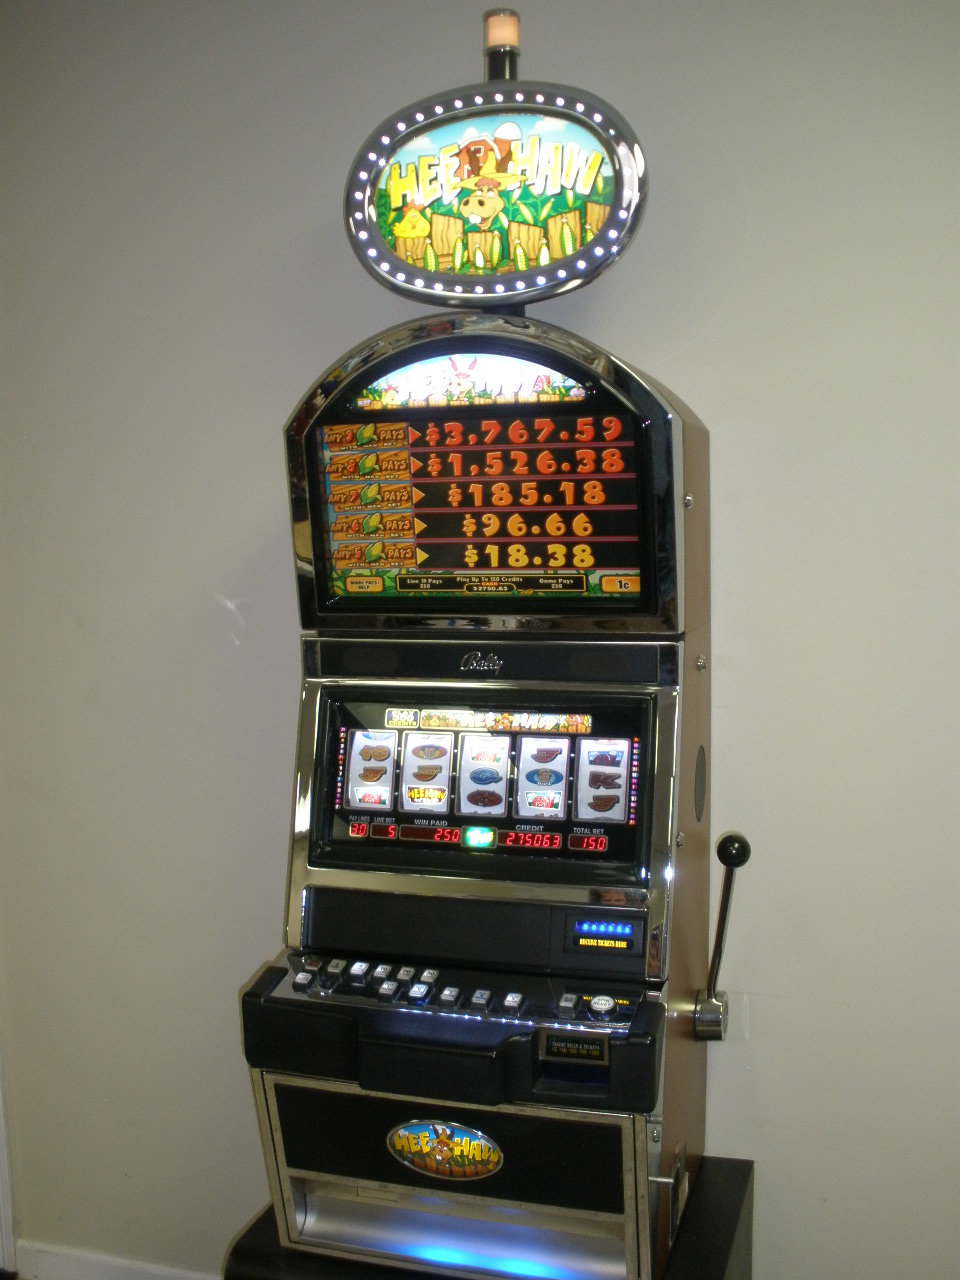 Bally Hee Haw S9000 Slot Machine with Top Bonus Monitor and Lighted ...